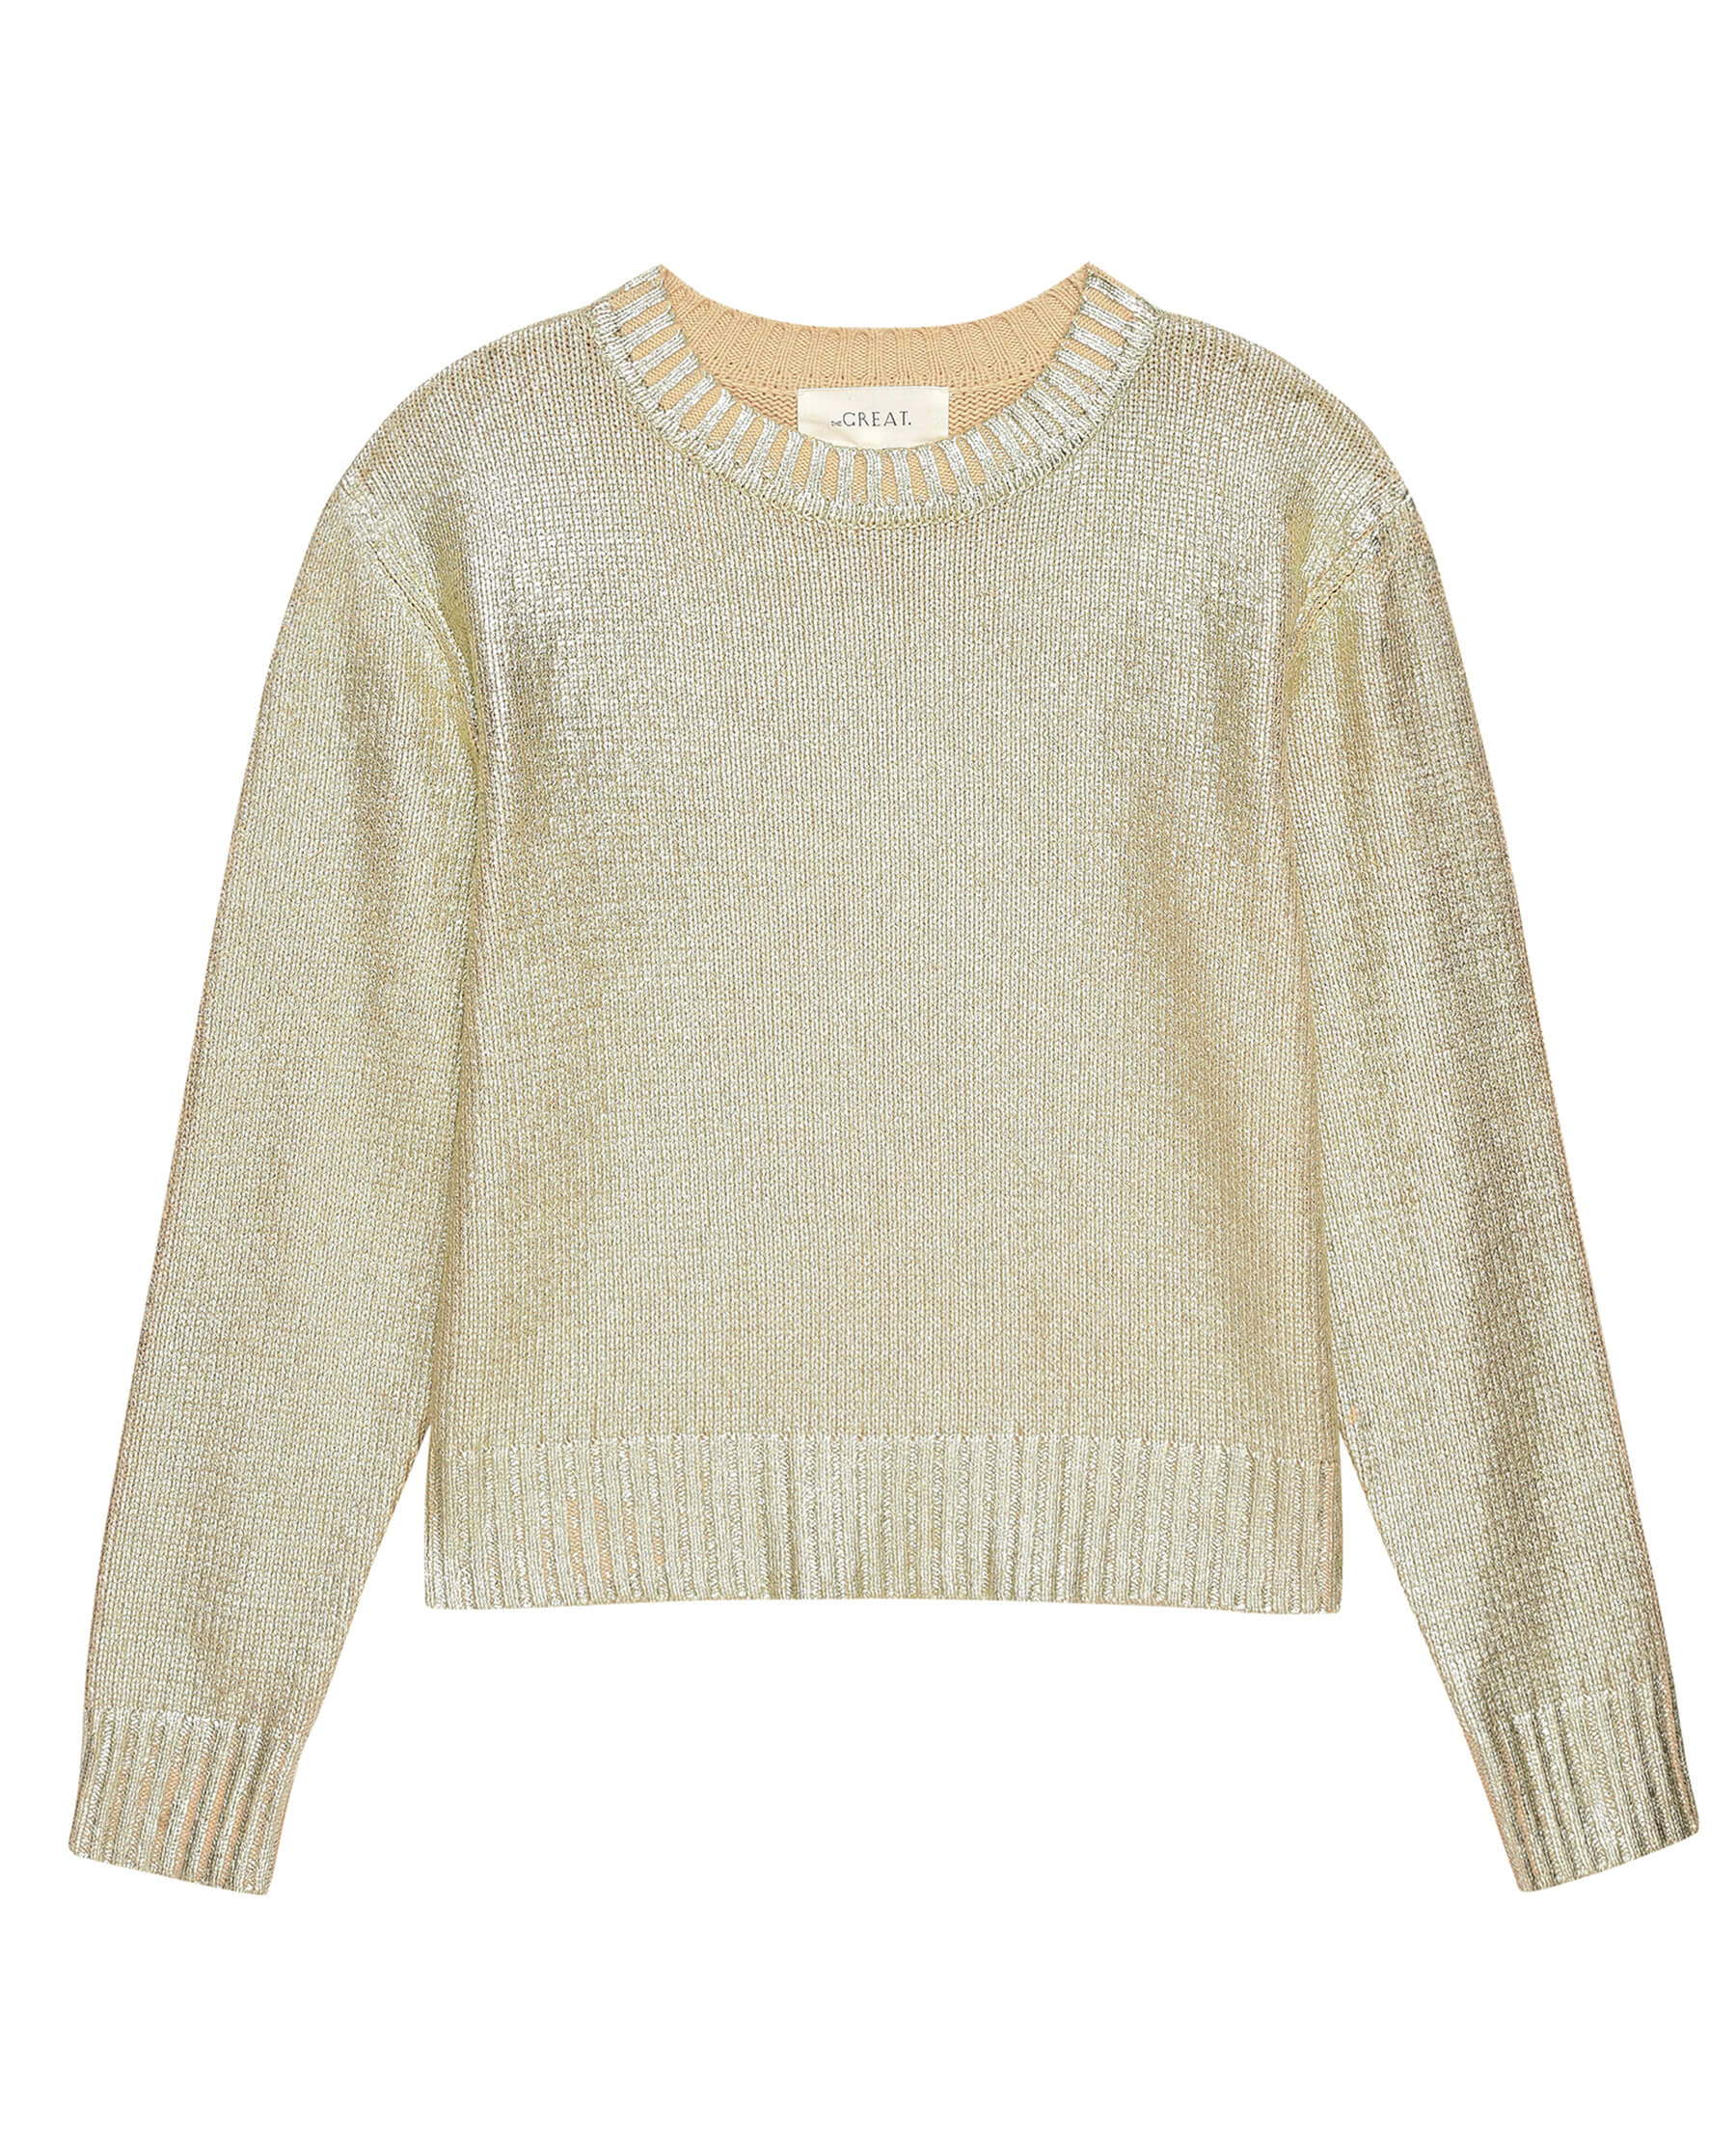 The Shrunken Pullover. -- Shimmer SWEATERS THE GREAT. HOL 23 D1 SALE